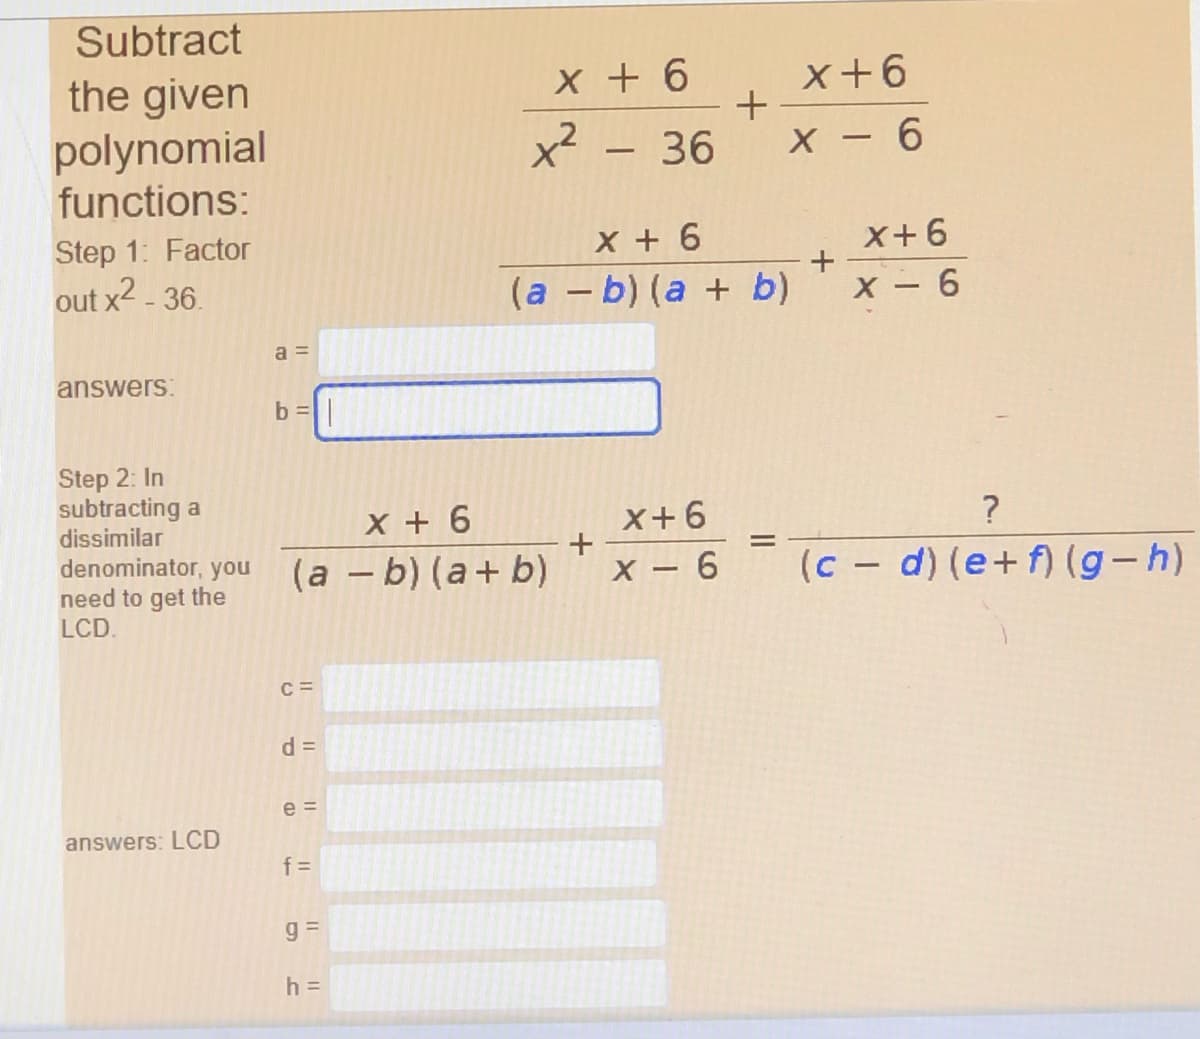 Subtract
the given
polynomial
functions:
x + 6
x - 36
x+6
+
X - 6
Step 1: Factor
X + 6
X+6
out x2 - 36.
(a – b) (a + b)
X 6
a =
answers:
b =|
Step 2: In
subtracting a
dissimilar
X + 6
X+6
?
denominator, you (a – b) (a+ b)
need to get the
LCD.
(c - d) (e+f) (g-h)
X - 6
C =
d =
e =
answers: LCD
f =
h =
